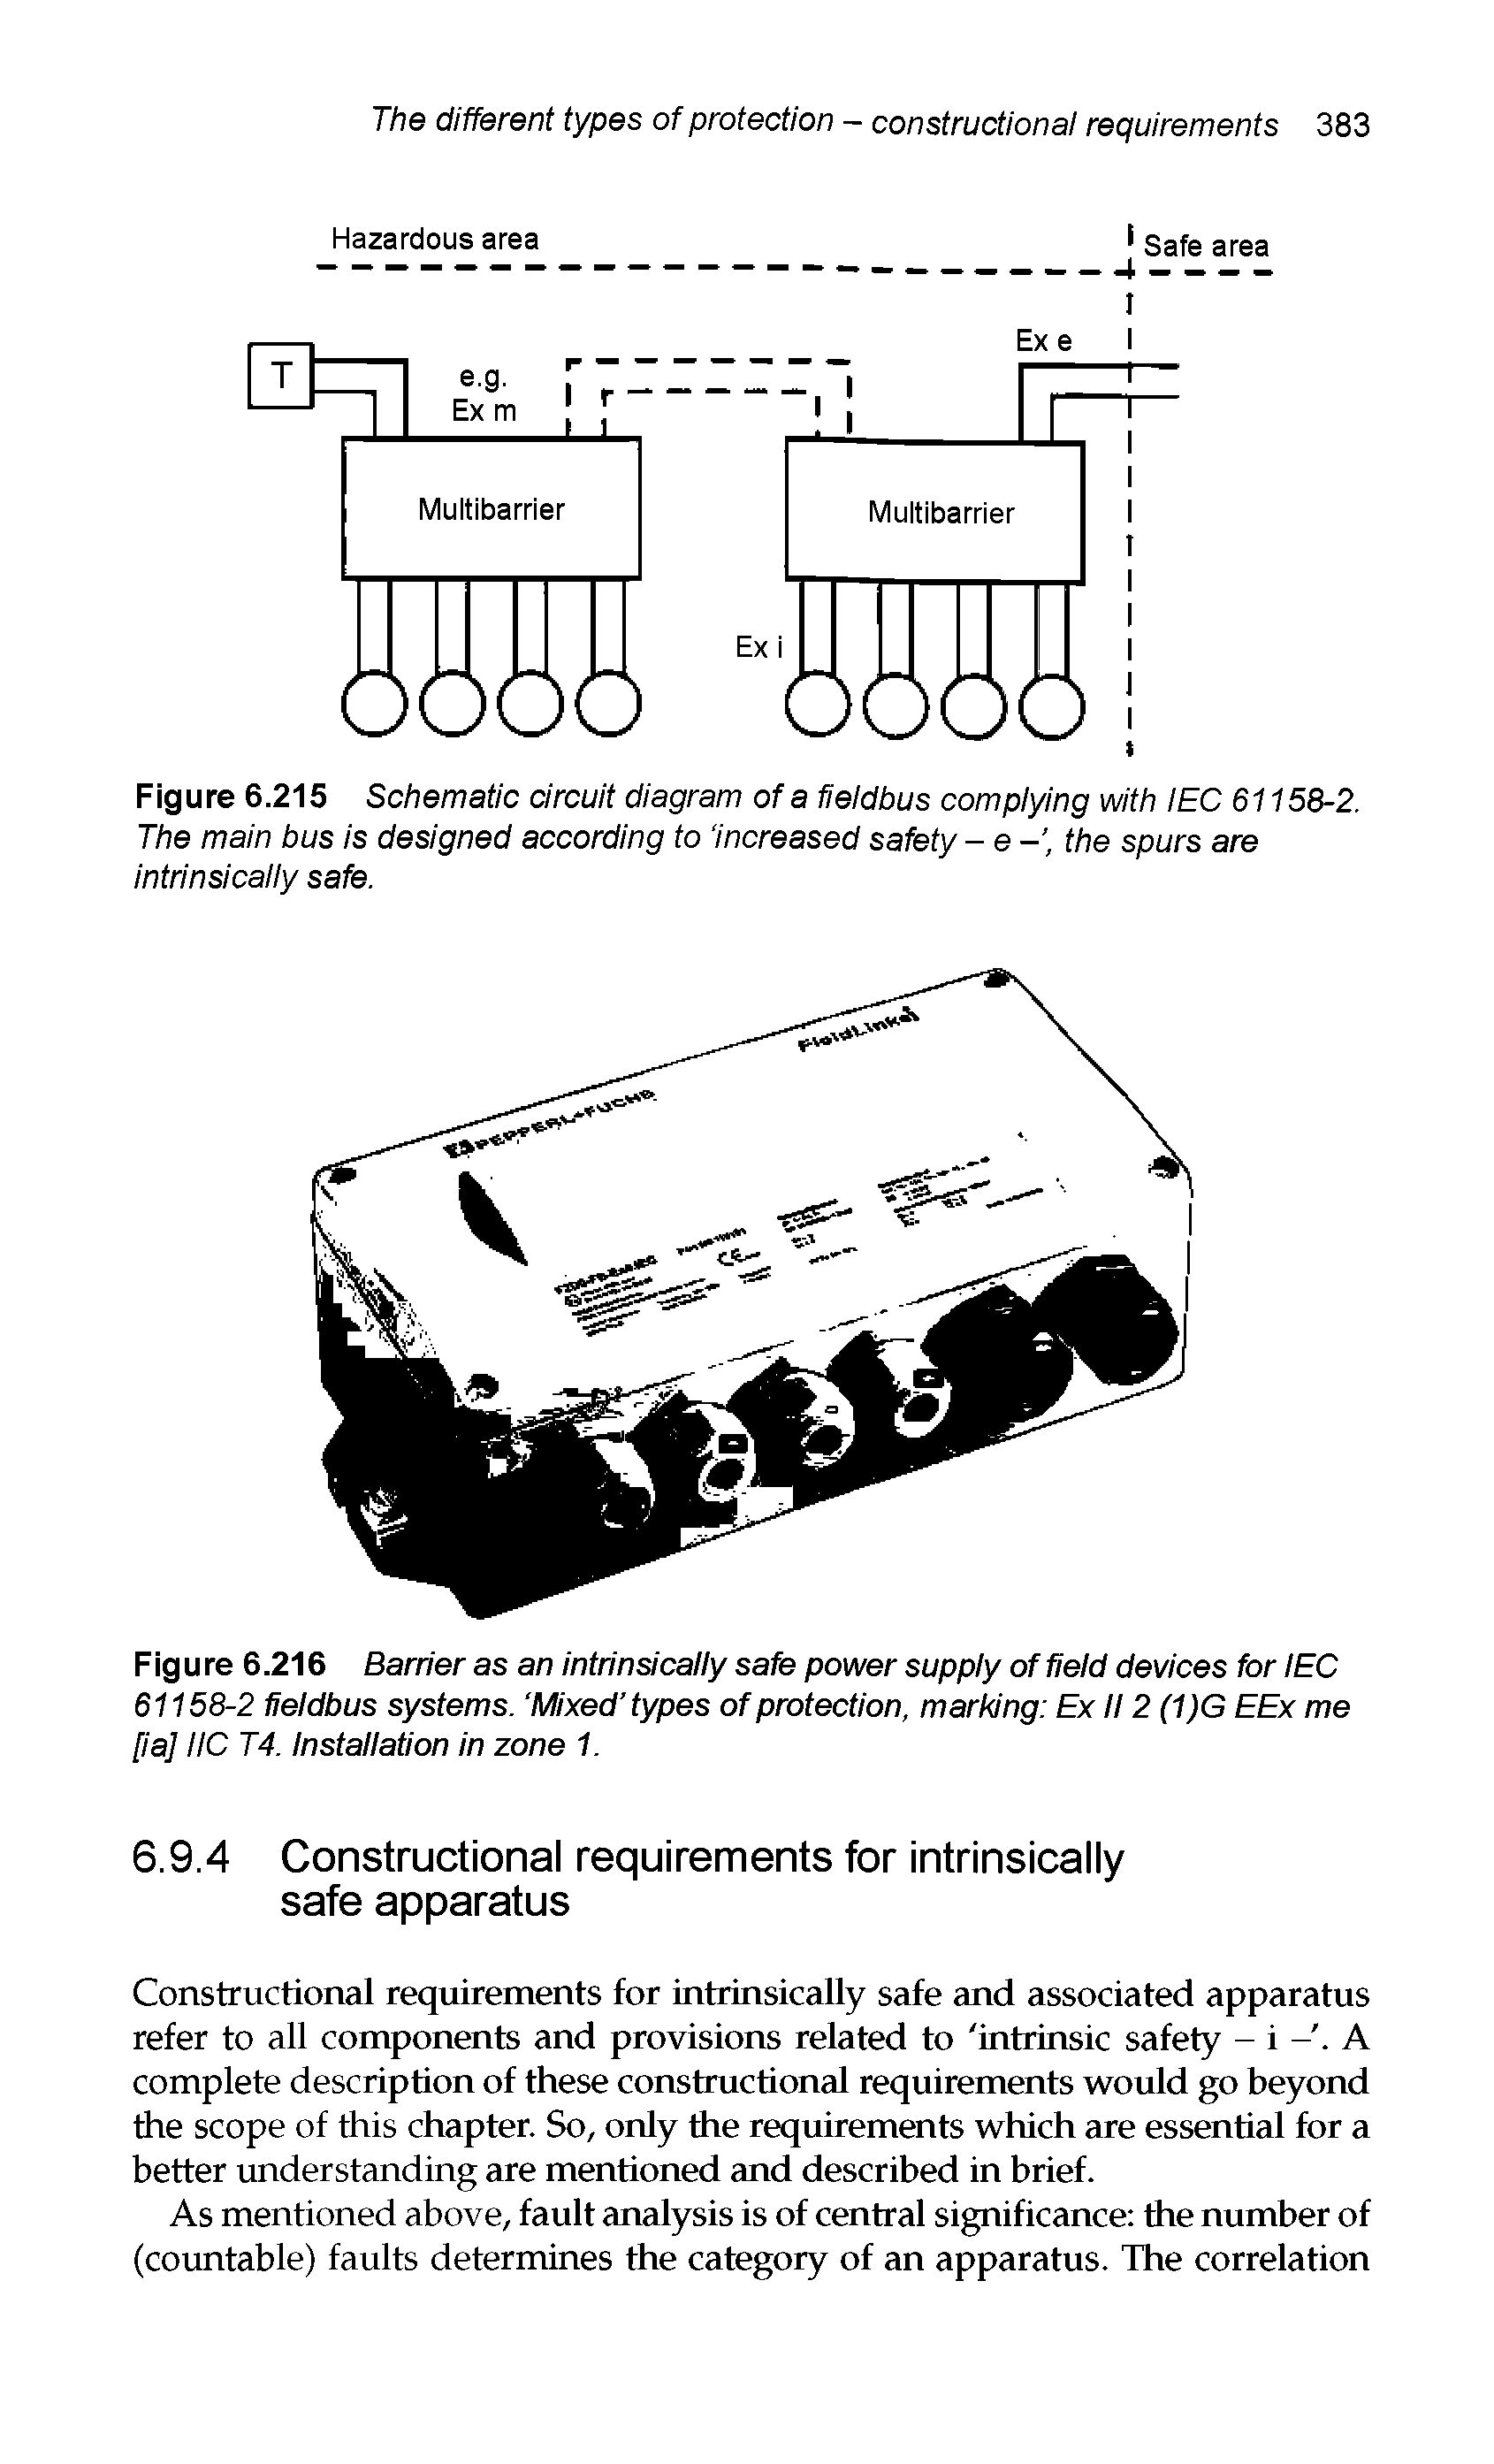 Figure 6.216 Barrier as an intrinsically safe power supply of field devices for IEC 61158-2 Heldbus systems. Mixed types of protection, marking Ex II2 (1)G EEx me [ia] IIC T4. Installation in zone 1.